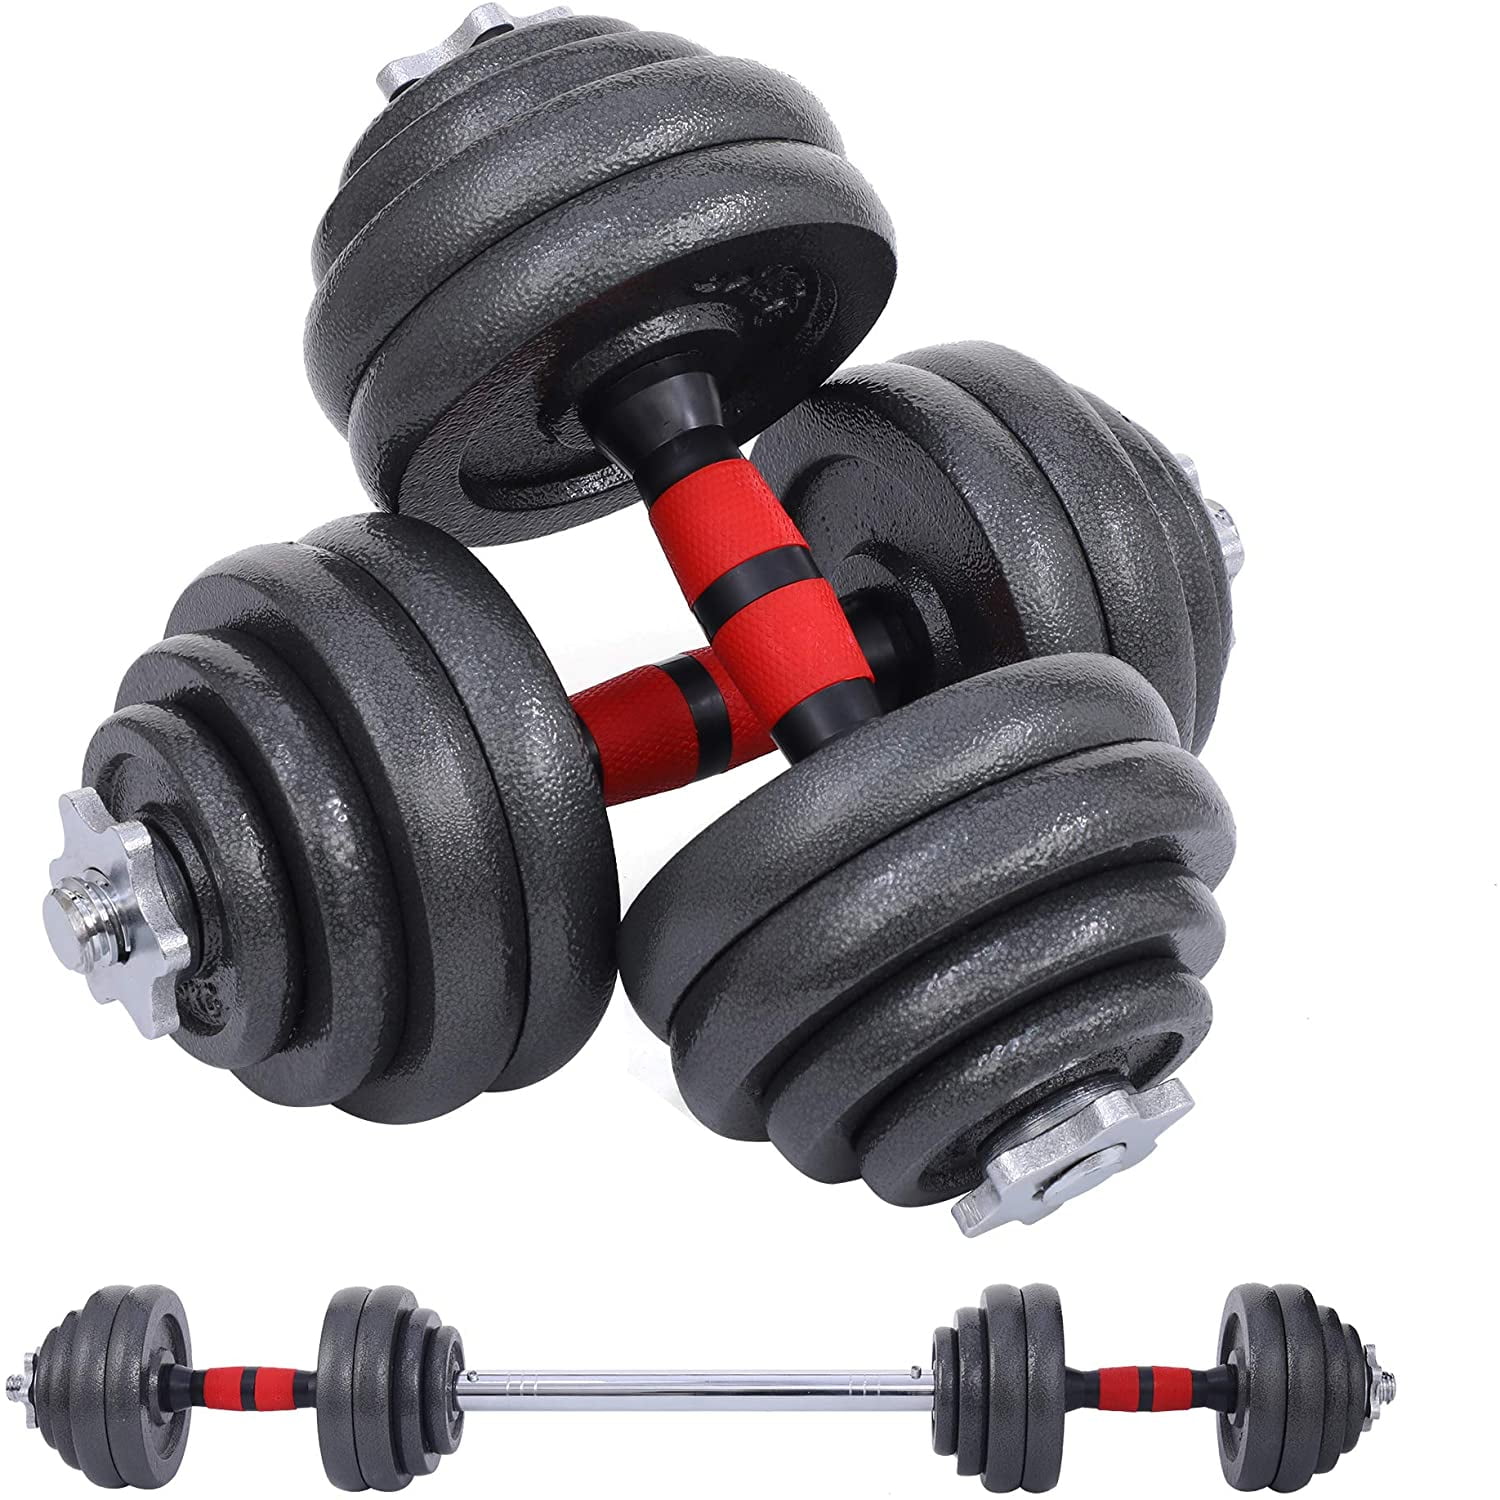 GYM Adjustable Dumbbell Set 22 44 66 88lb Weight Barbell Plates Home Workout Fit 